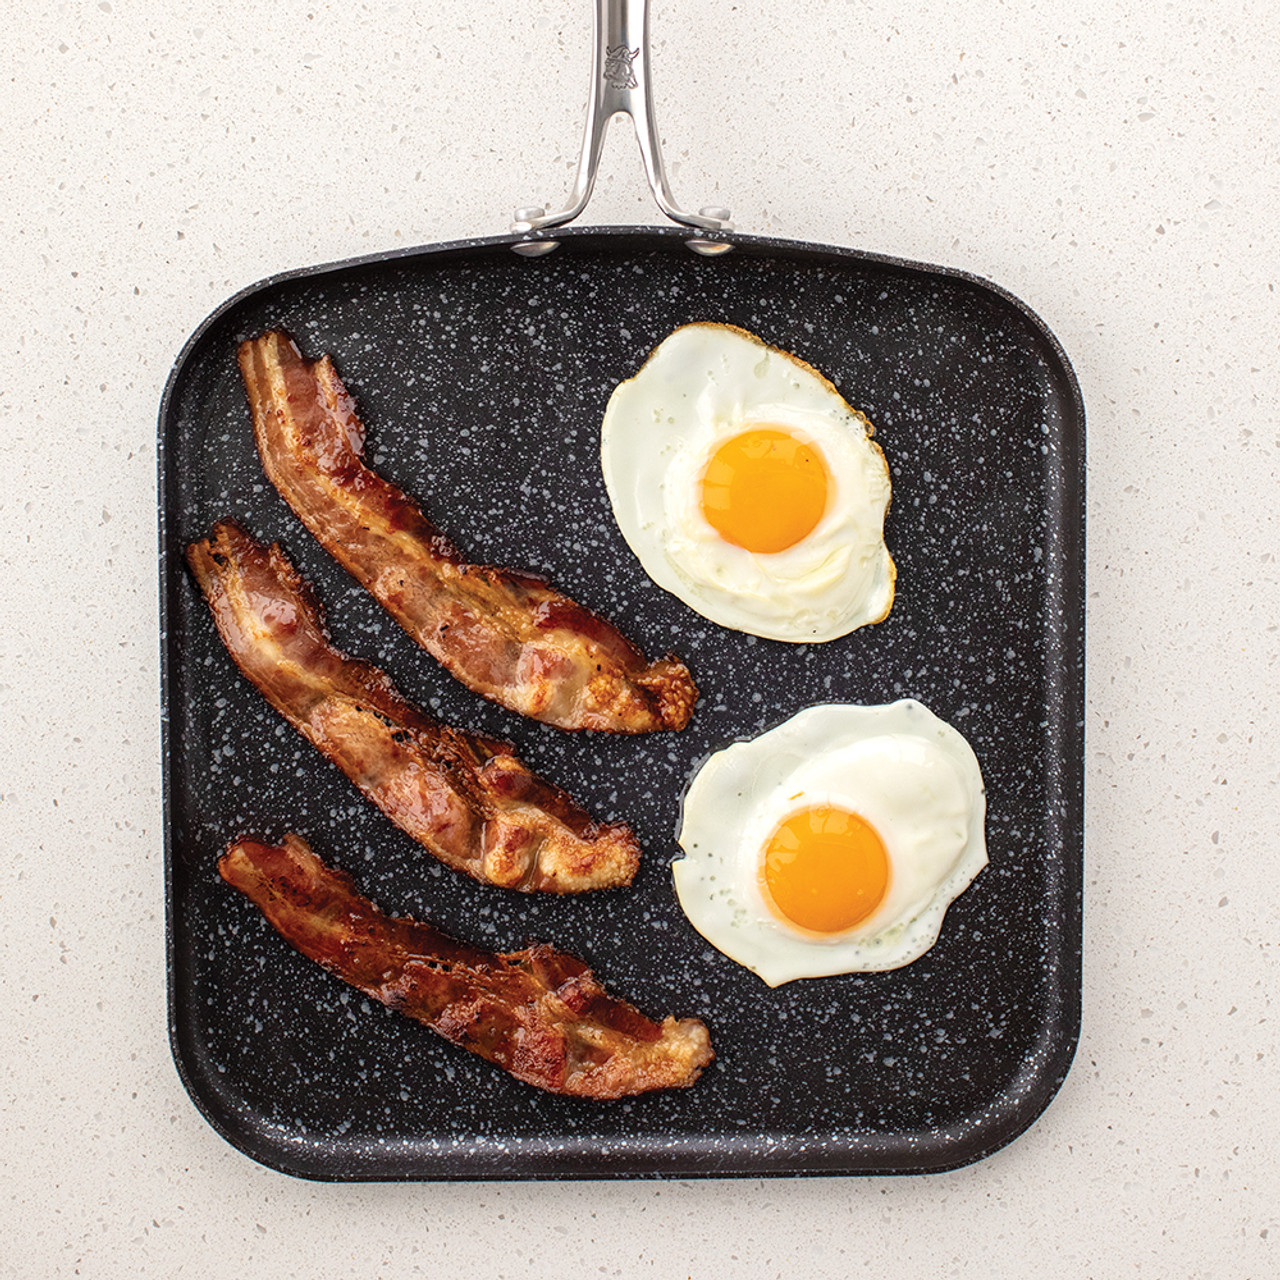 https://cdn11.bigcommerce.com/s-x58in4vio5/images/stencil/1280x1280/products/785/3628/21171_11inch_Square_Griddle_with_breakfast_foods_overhead_1K__39993.1693590738.jpg?c=1